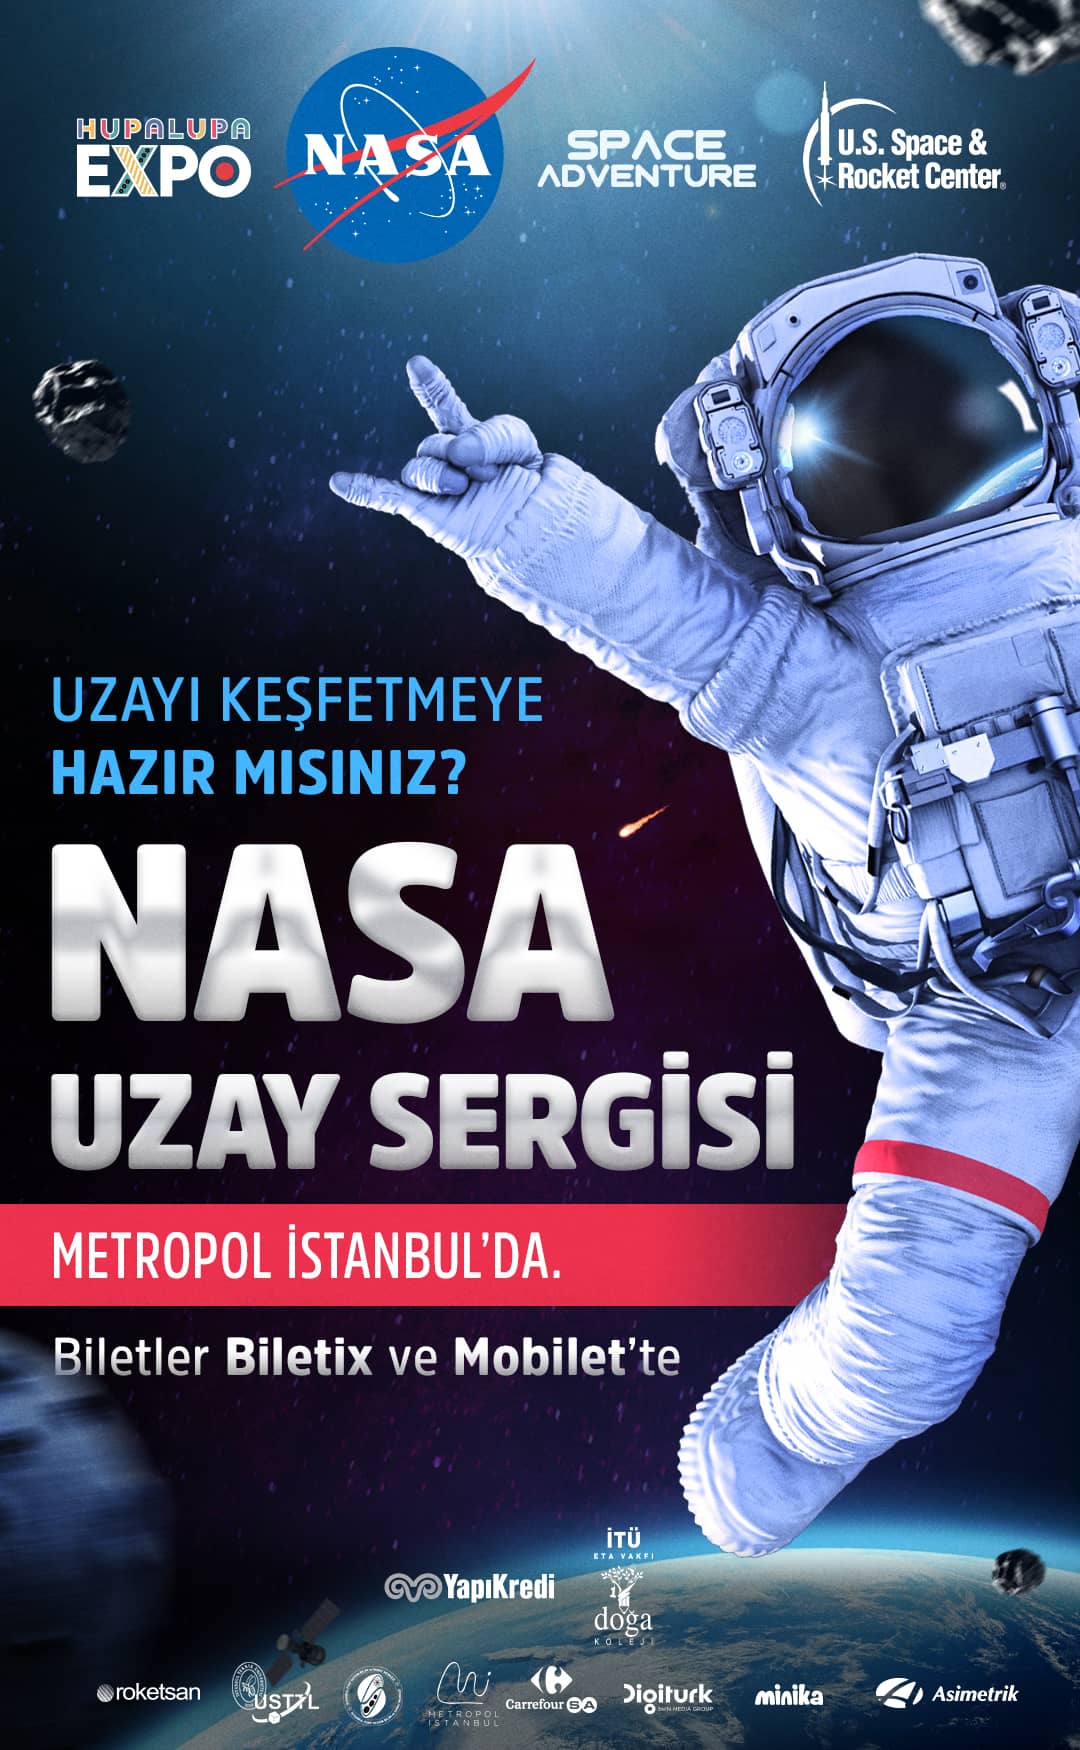 Are you ready to explore space with Metropol Istanbul?